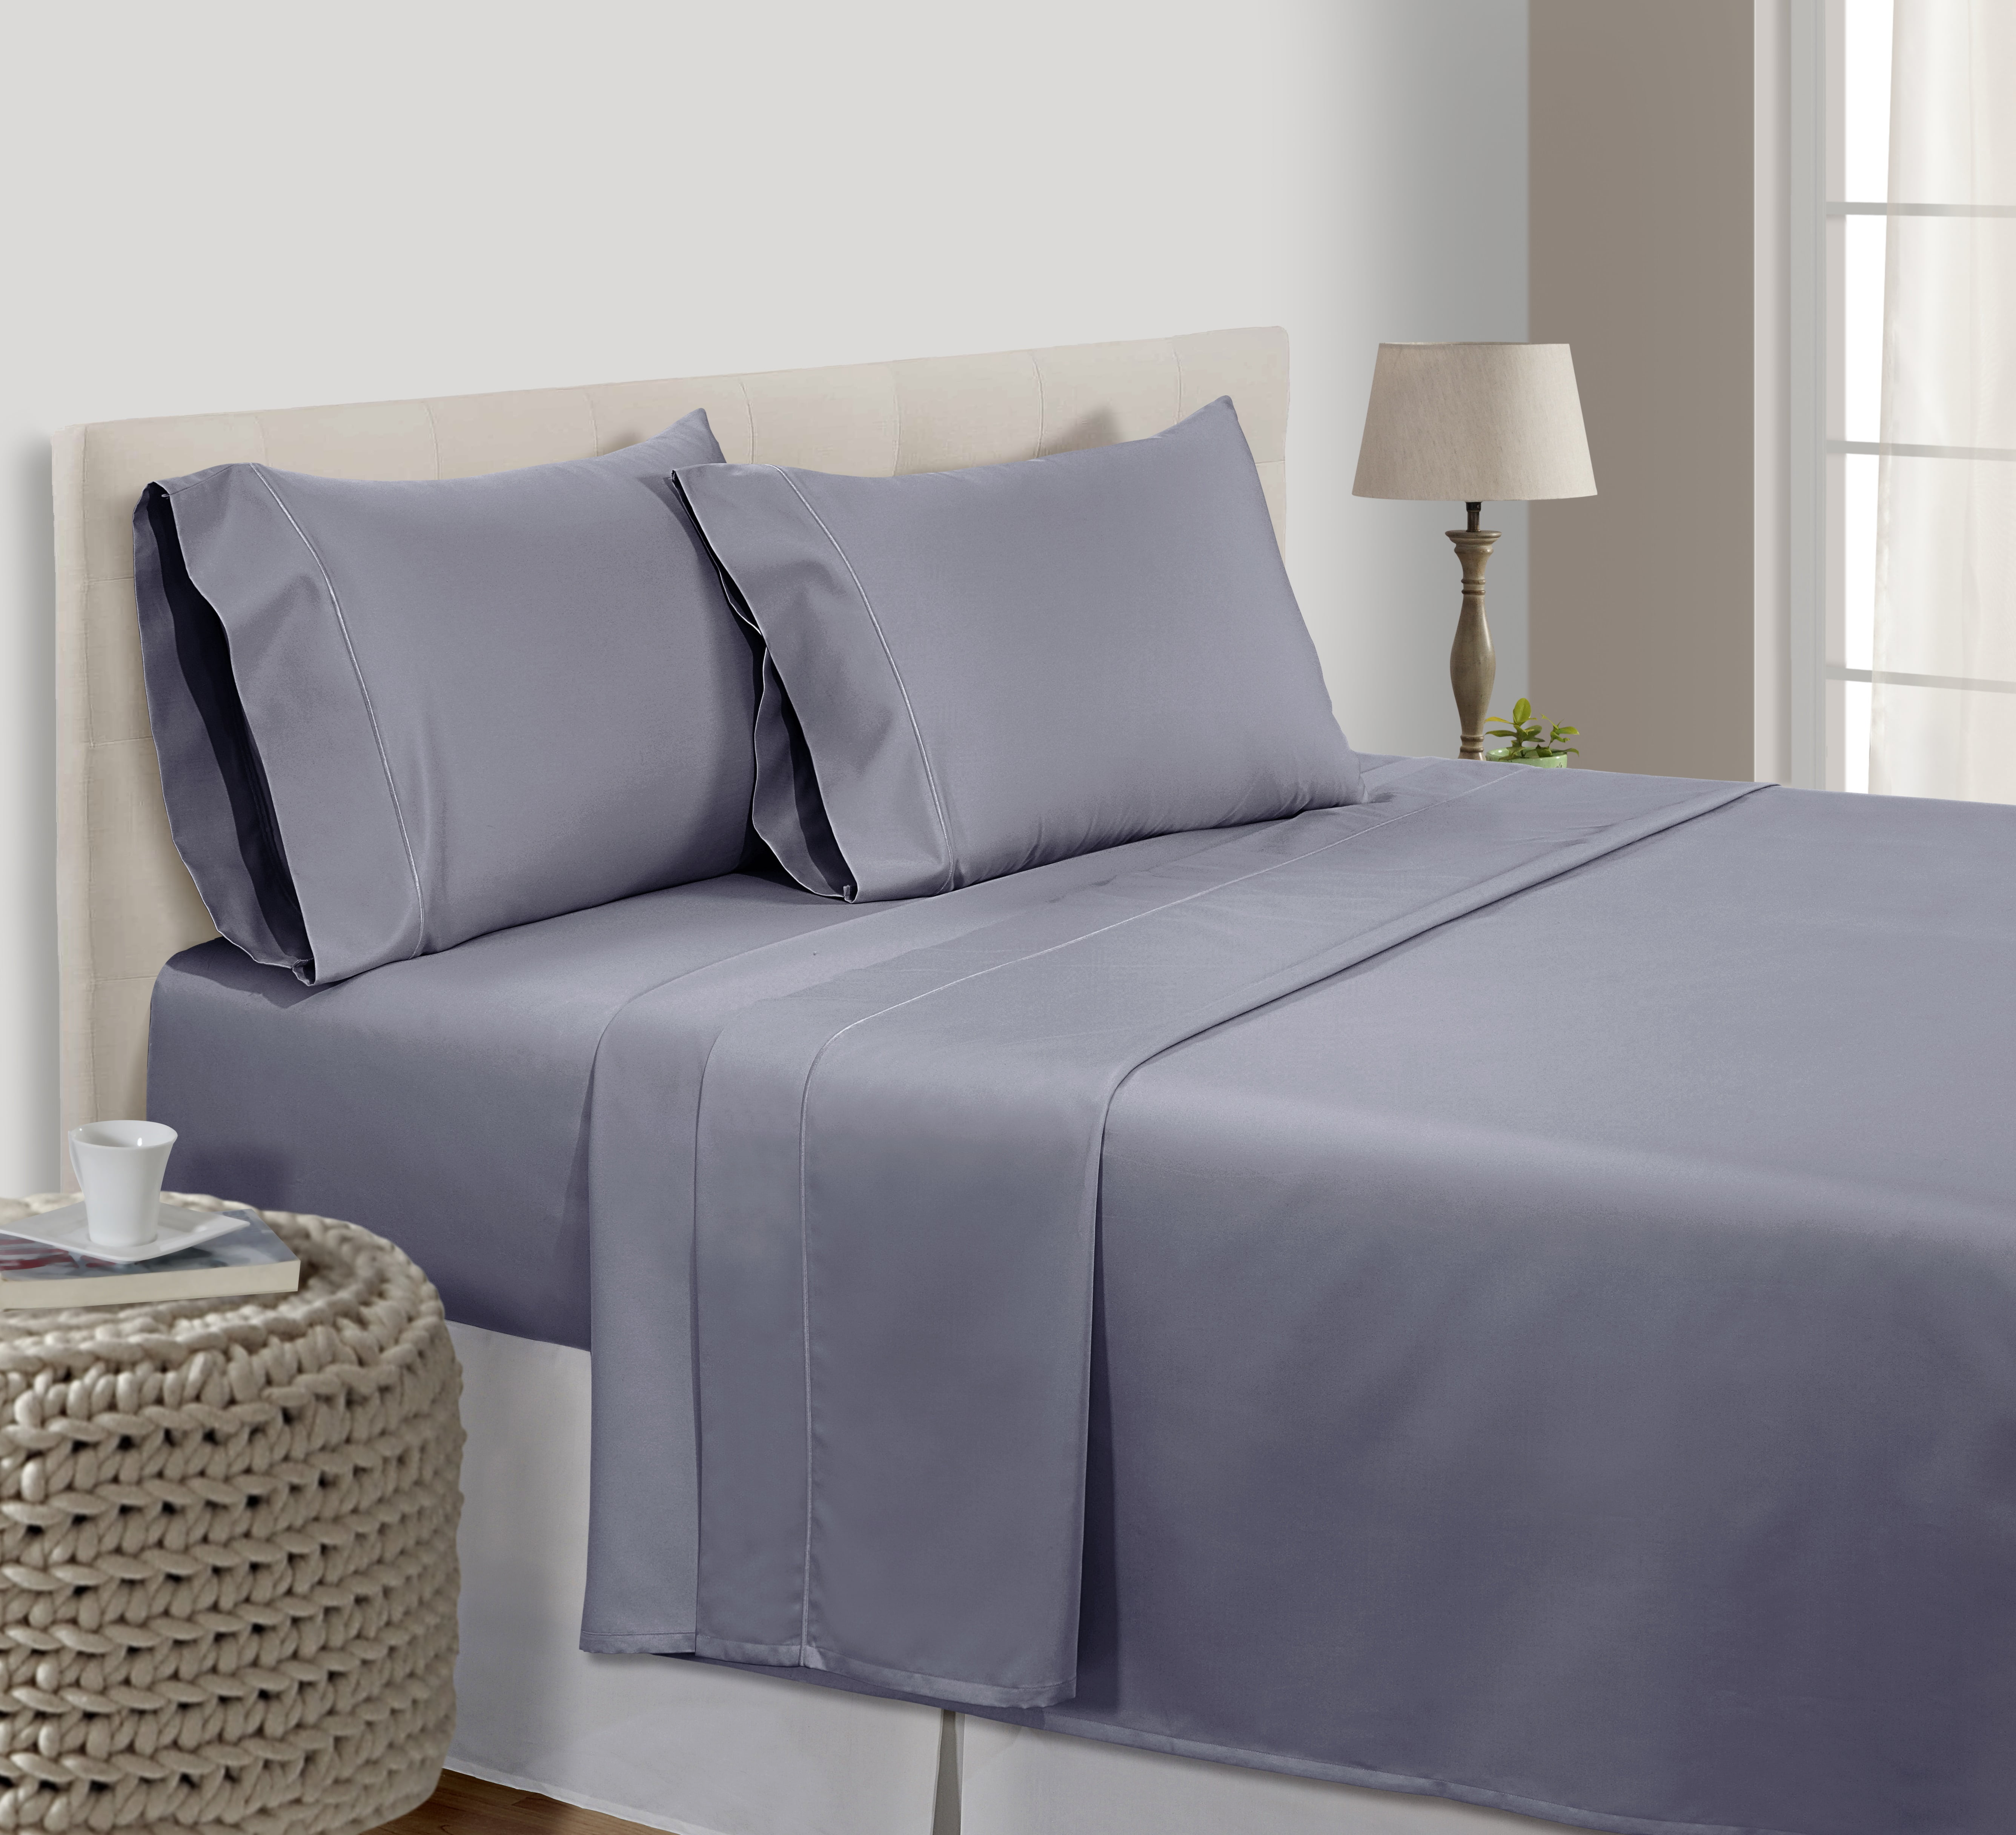 Standard & Extra Deep Fitted Bed Sheets 100% Poly Cotton Blend 180 Thread Count 